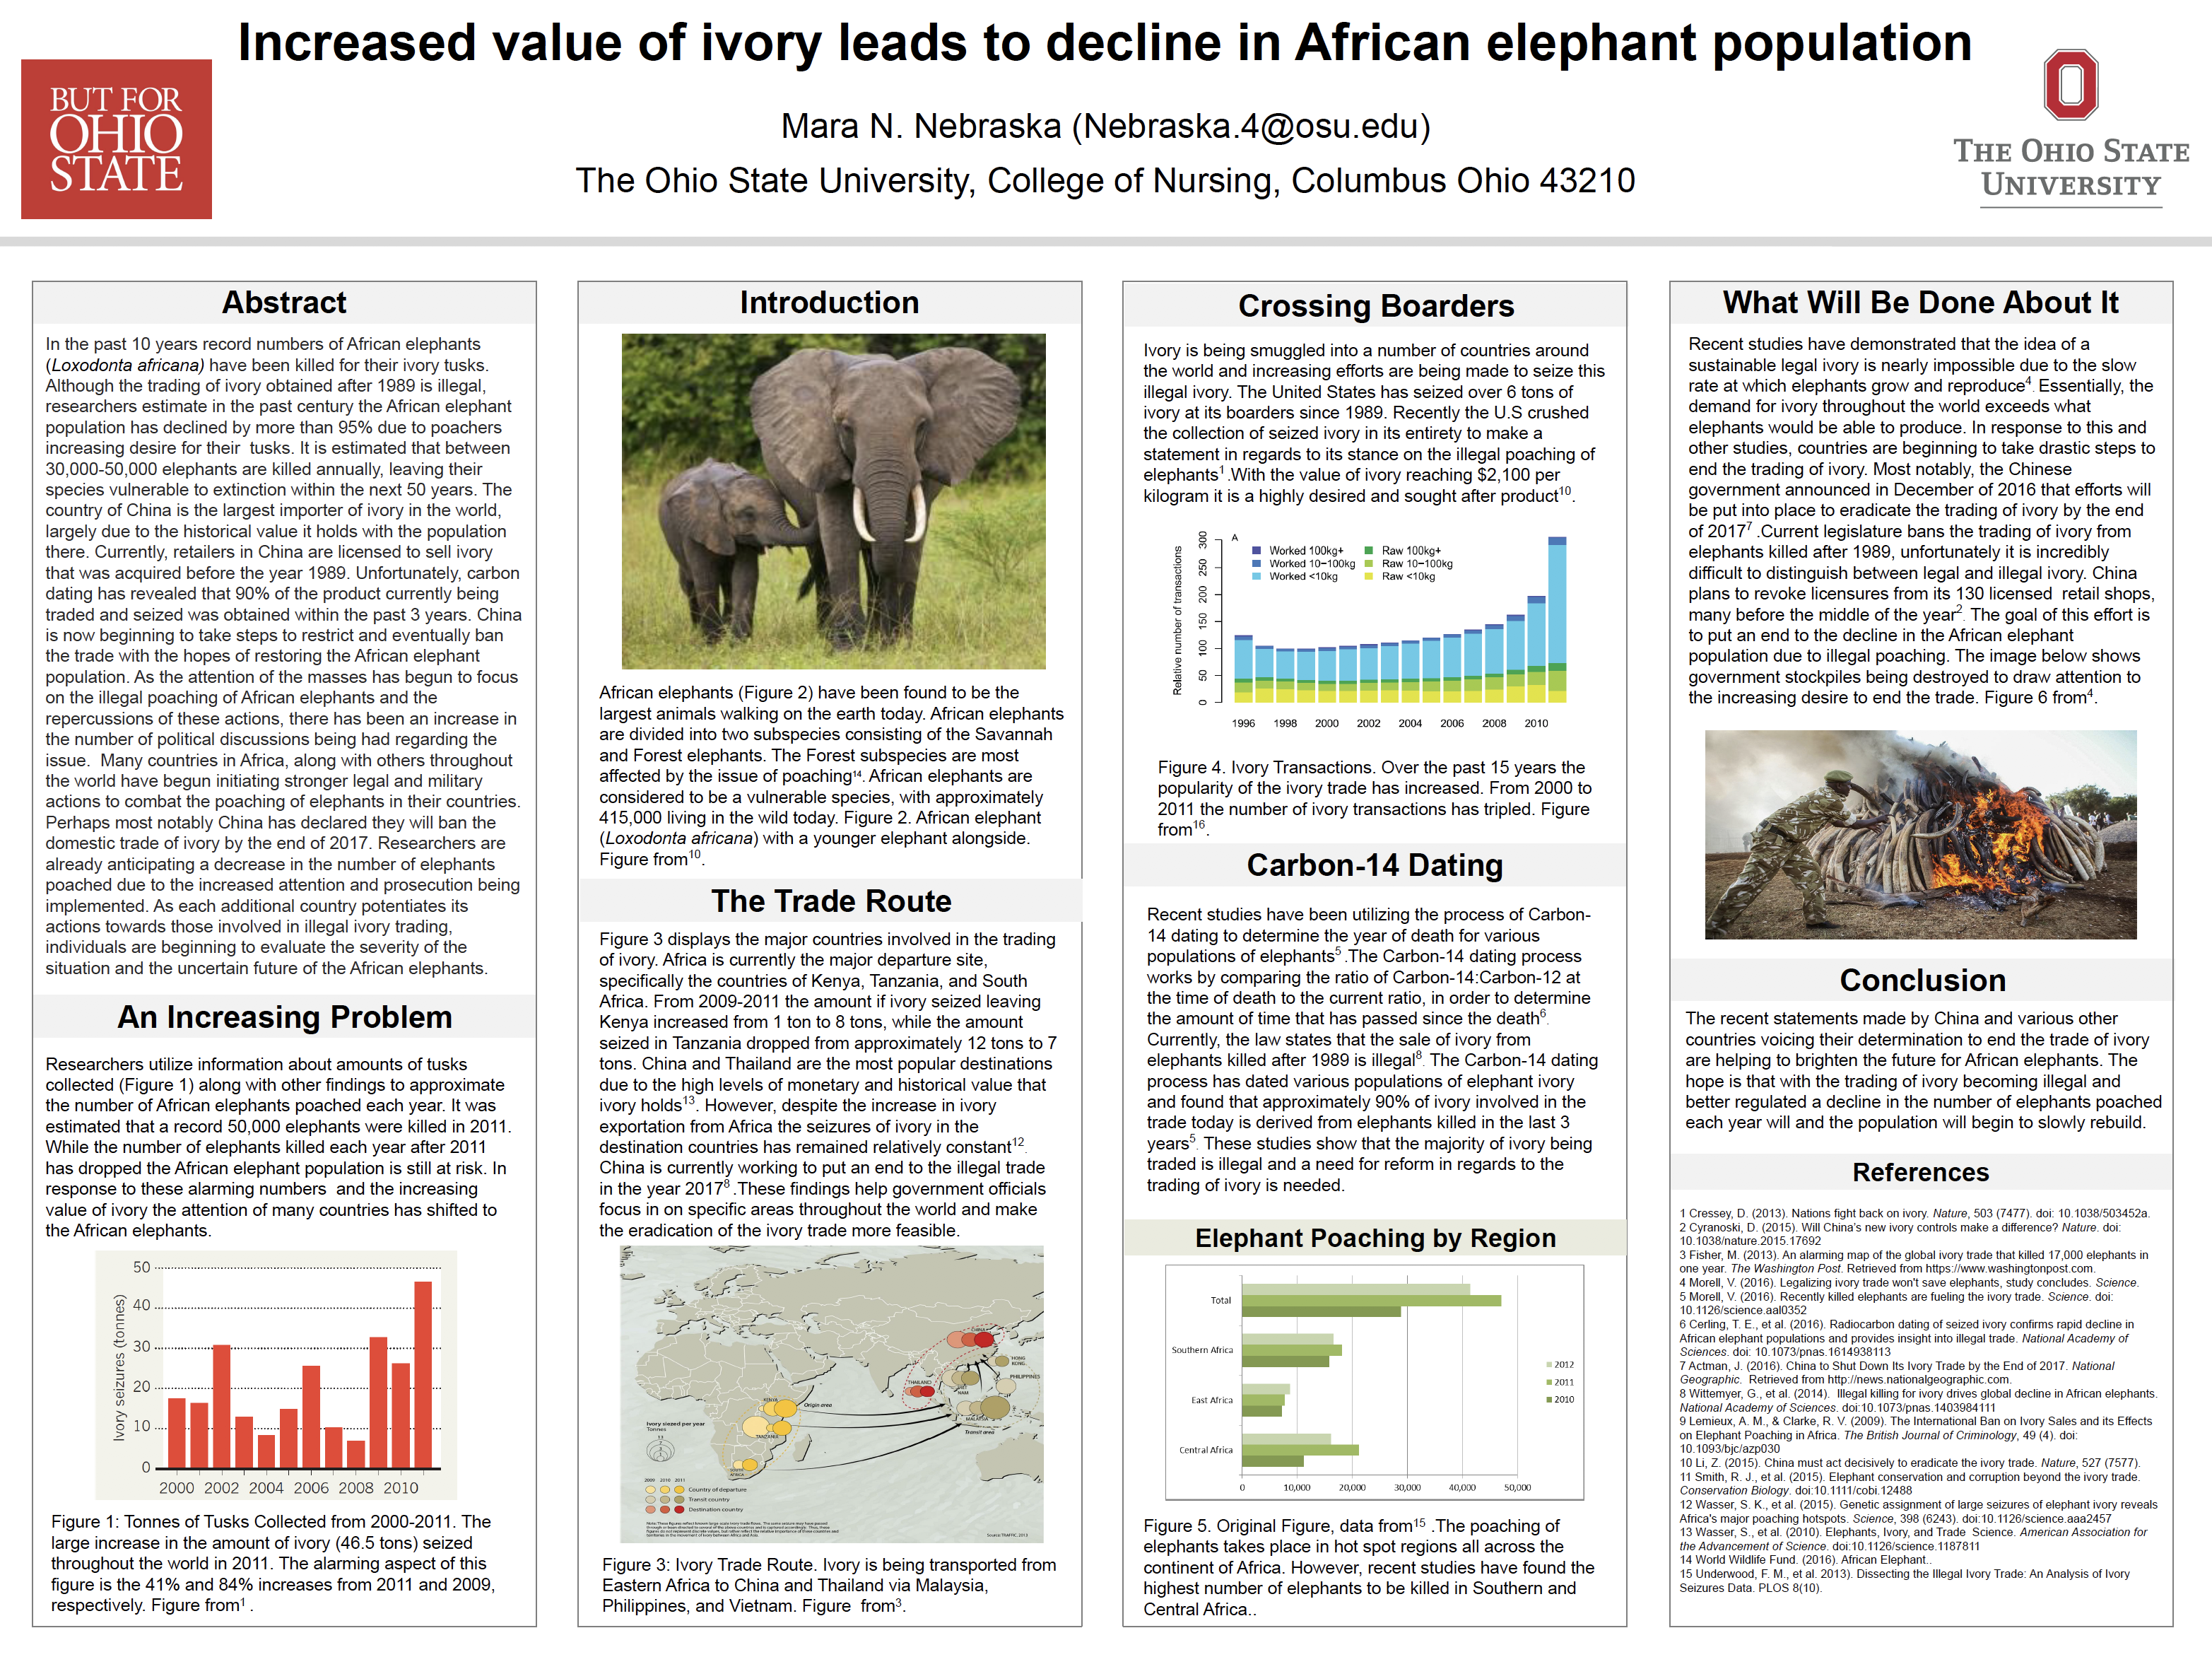 Student poster entitled Increased value of ivory leases to decline in African elephant population. Poster completed by Mara N. Nebraska from The Ohio State University, College of Nursing, Columbus Ohio 43210.